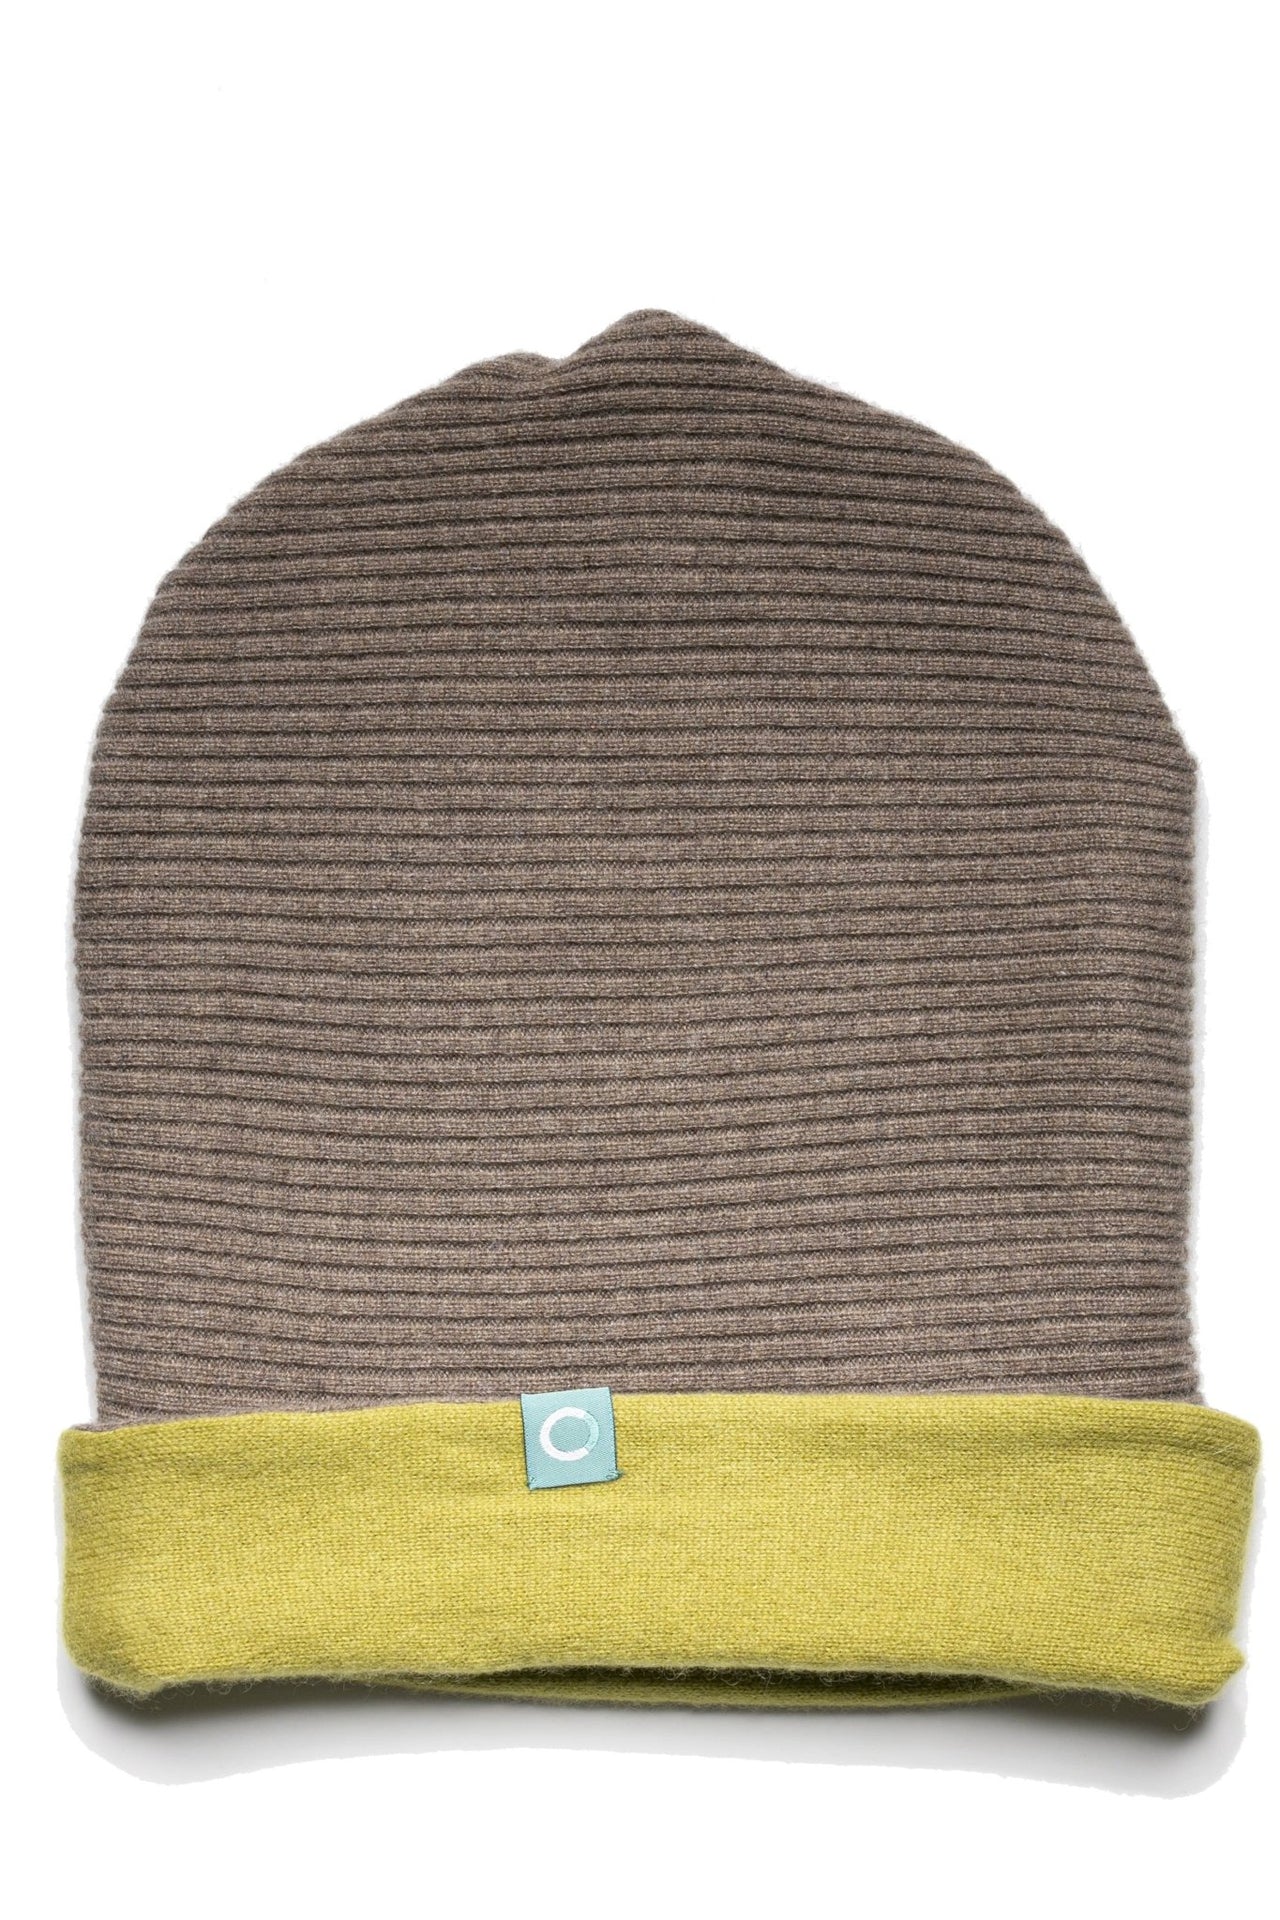 Recycled Beanie Hats - Made Scotland